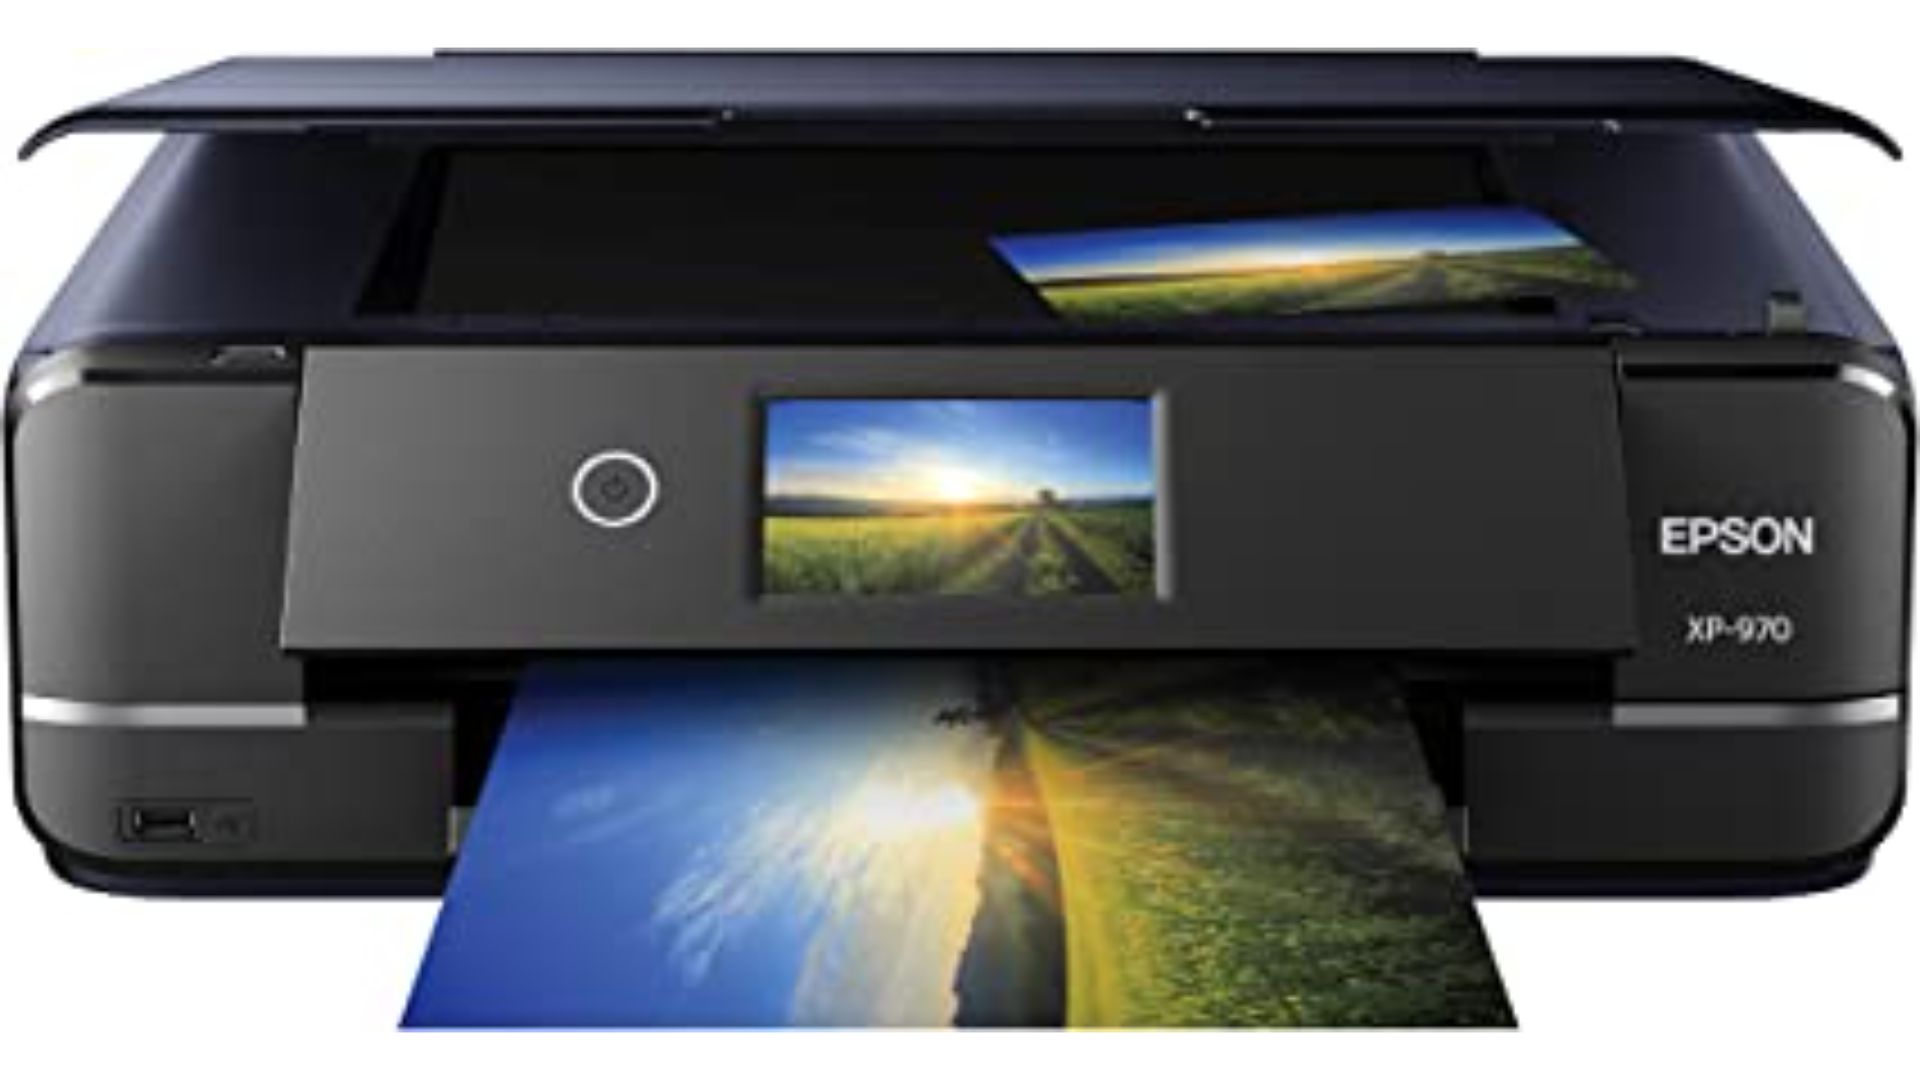 Epson Expression Photo XP-970 - The best mid-range compact printer wireless for graphic artists